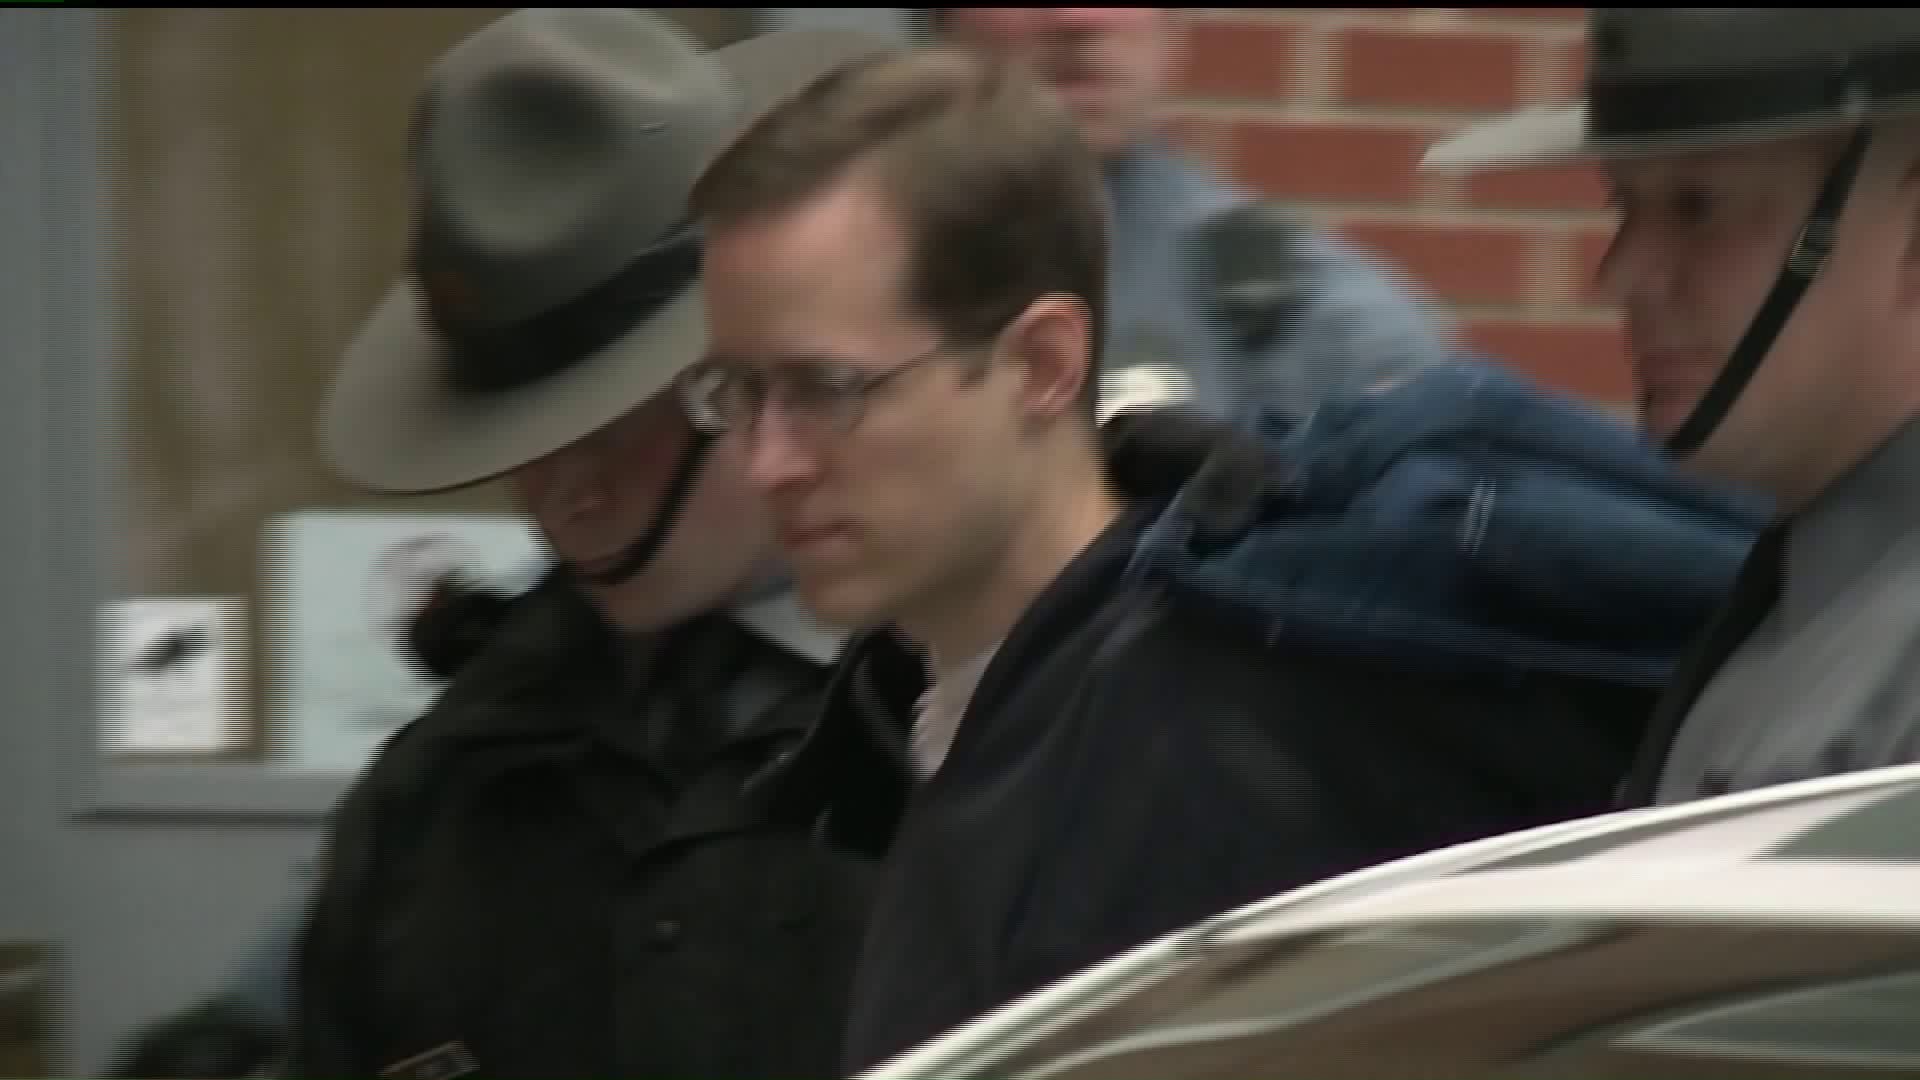 Eric Frein Moved to Maximum Security Prison in Western Pennsylvania